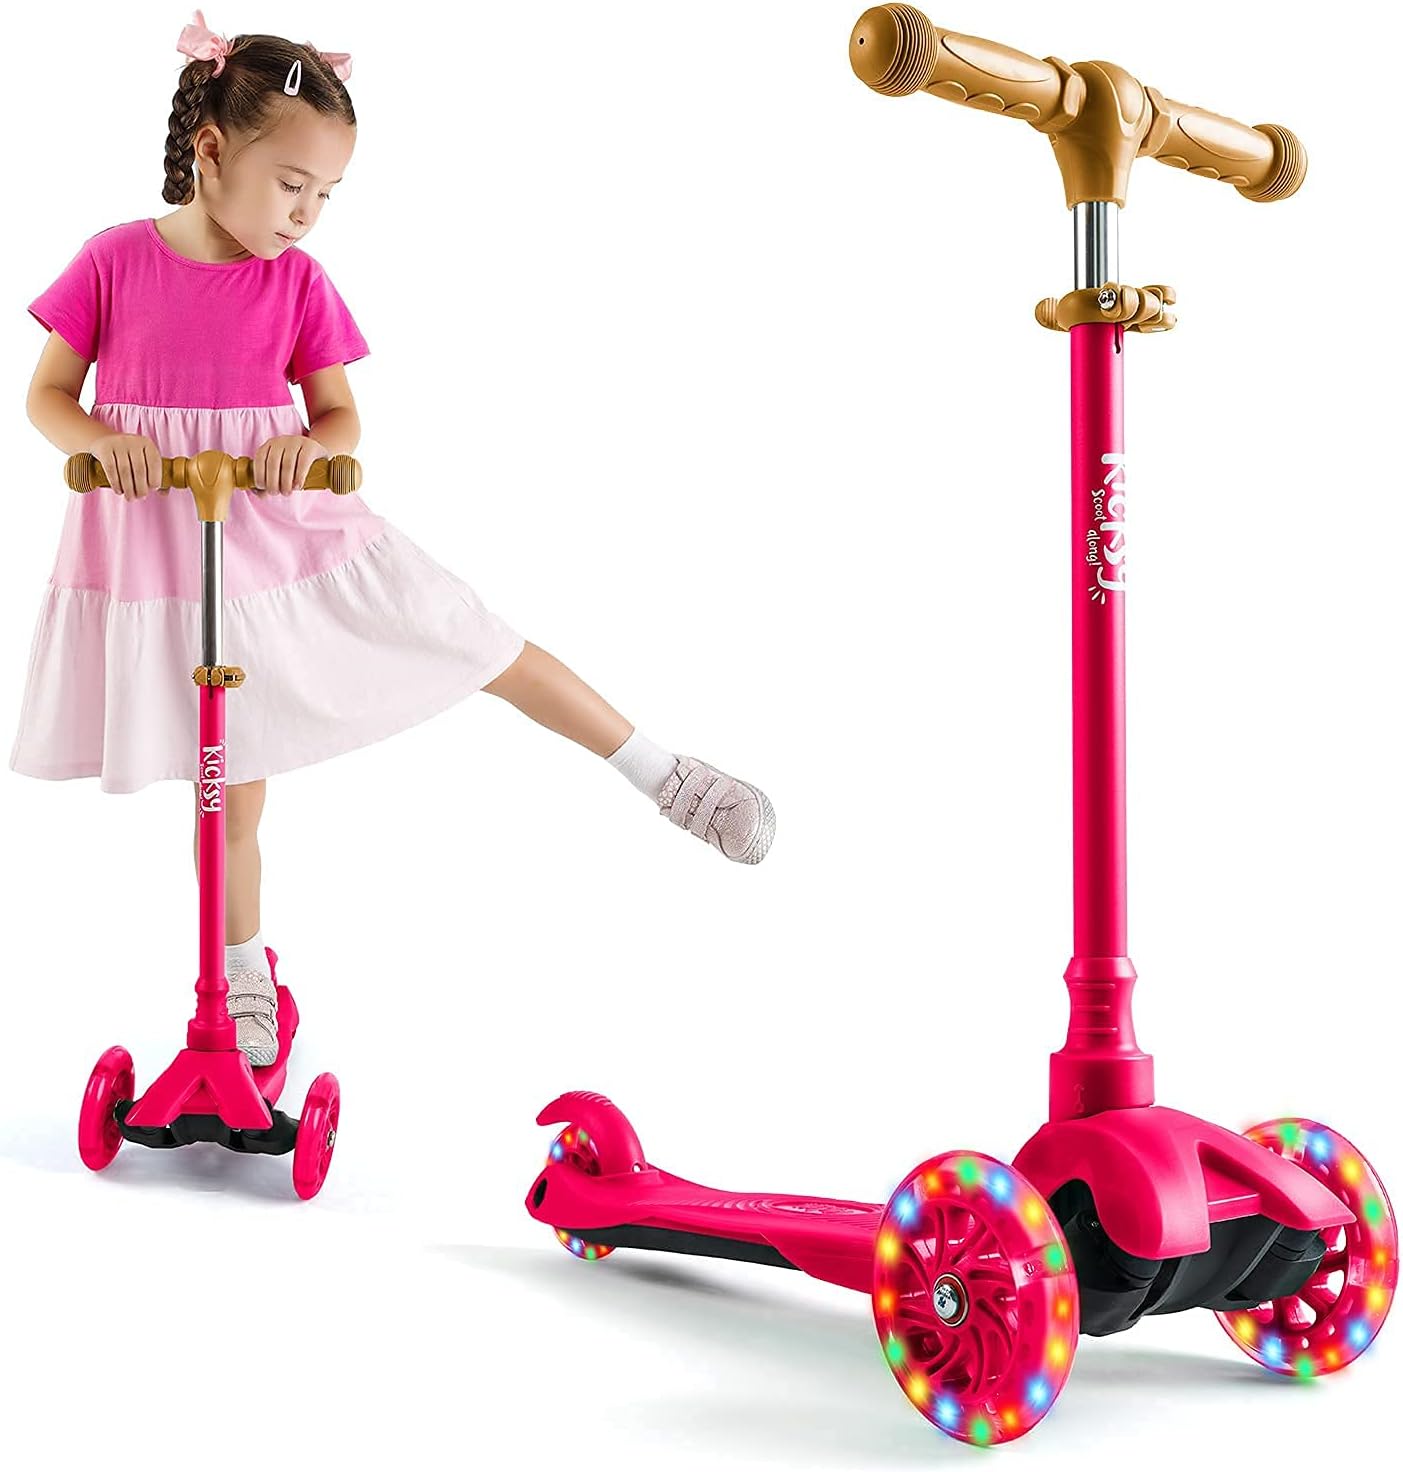 Kicksy - Kids Scooter - Toddler Scooter for Kids 2-5 Adjustable Height - 3 Wheel Scooter for Kids Ages 3-5 Boys & Girls - Kids Three Wheel Scooter with Light Up LED Wheels